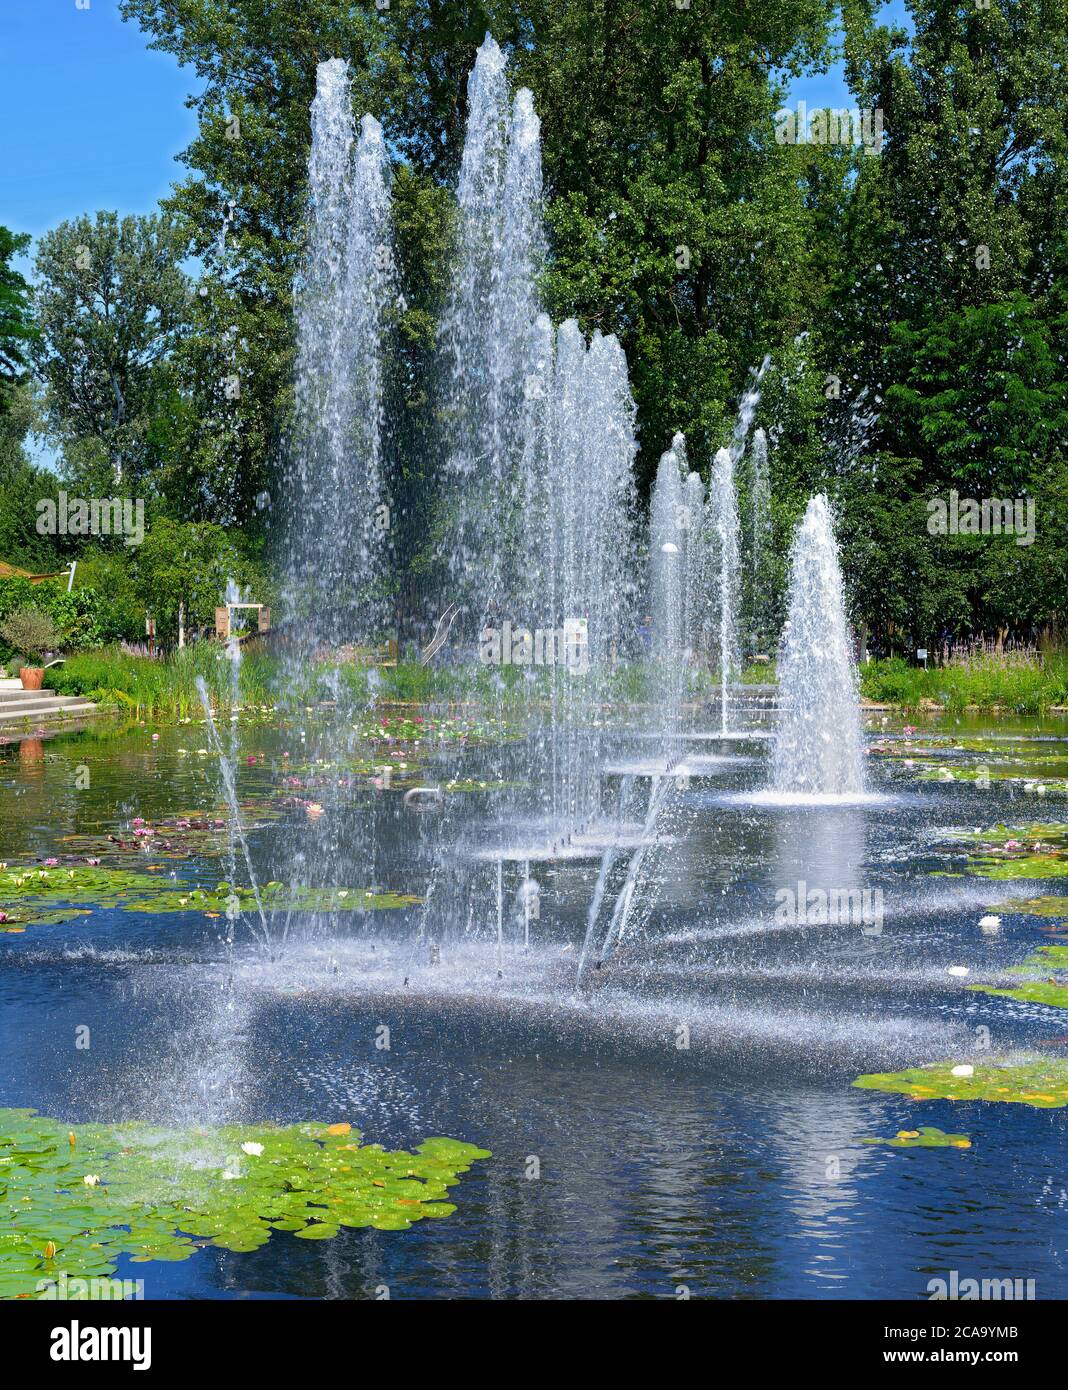 trick fountains in a pond with flourishing water lilies at Tulln, Austria Stock Photo